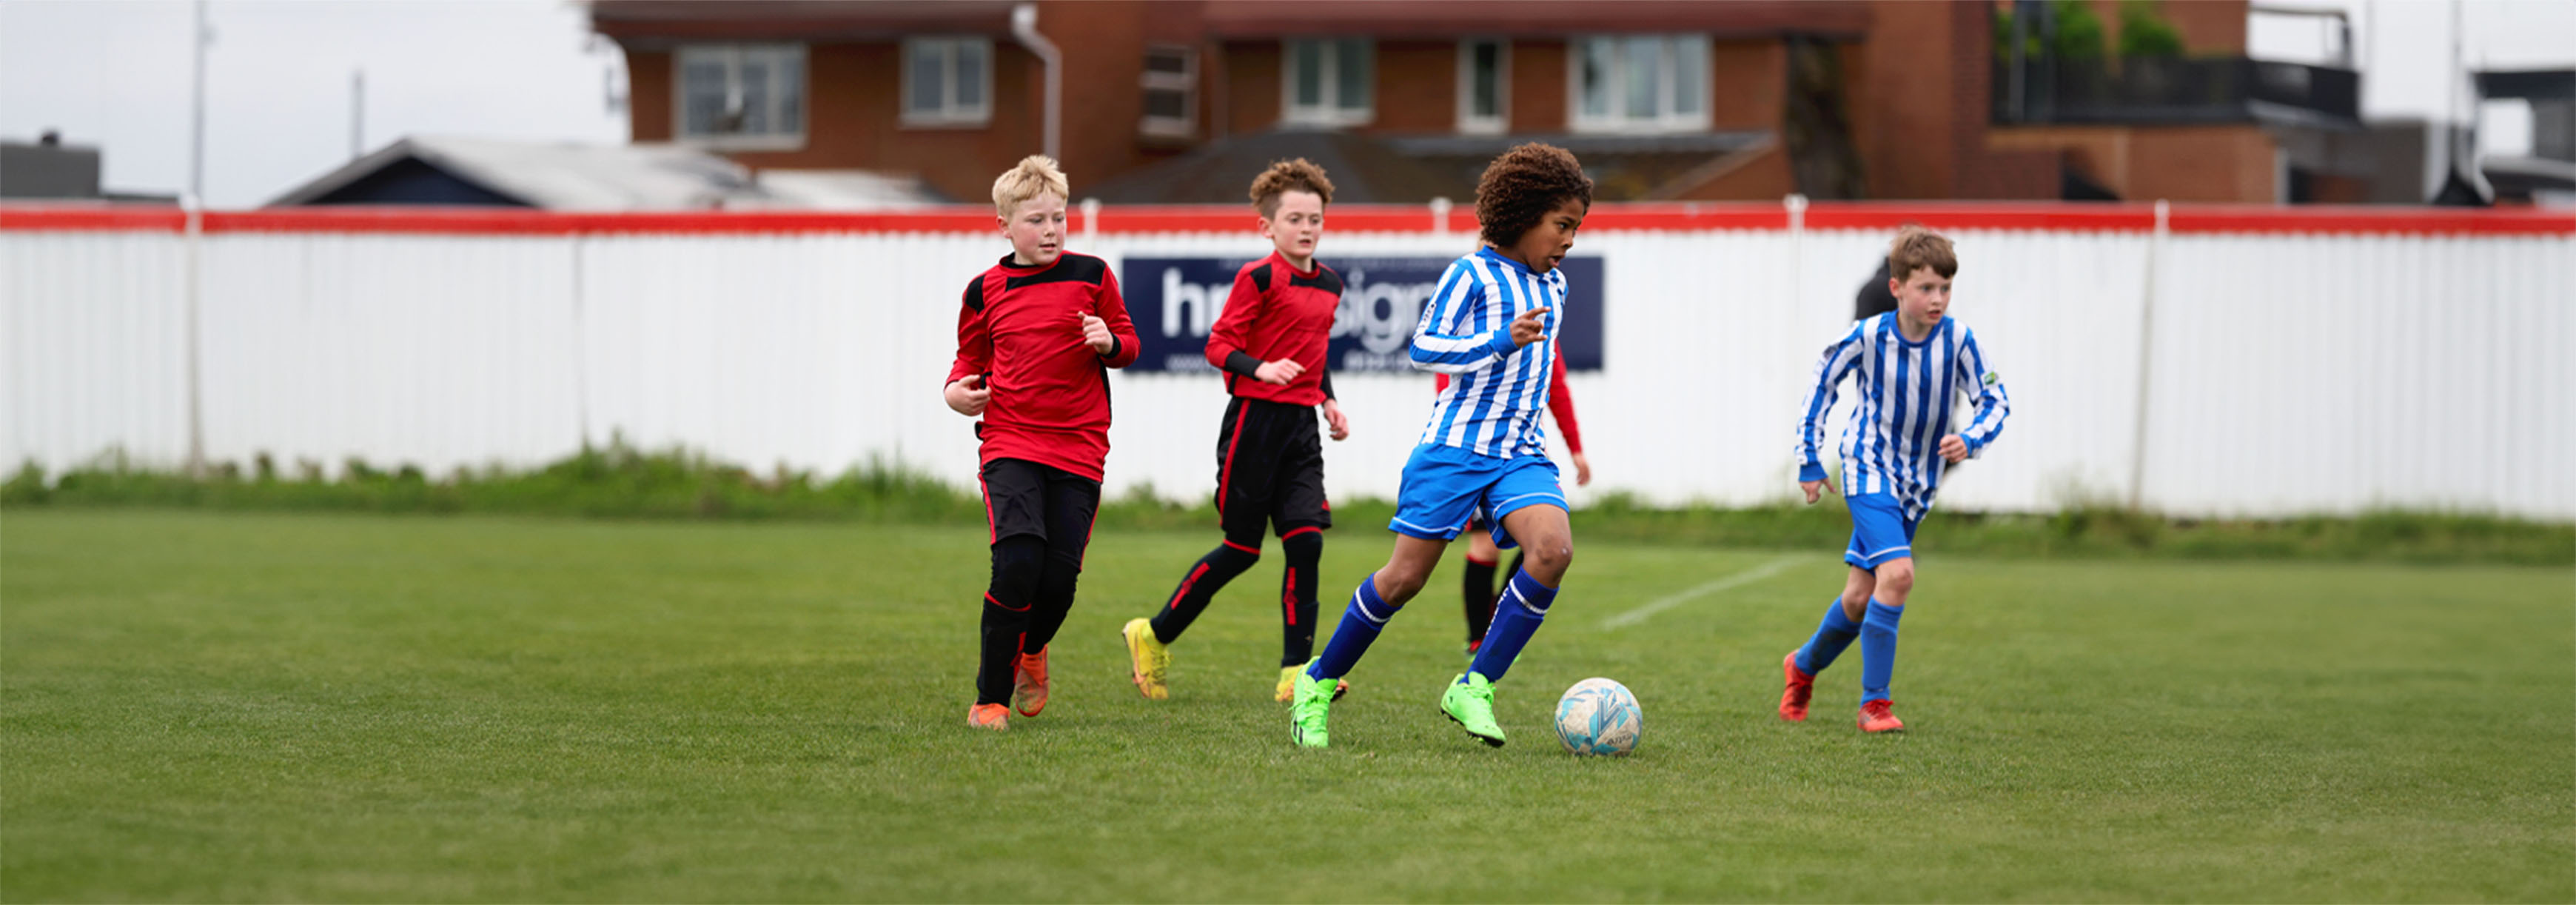 Young player wearing a blue and white striped kit runs with the ball. Beside him runs another child in the same kit, and behind are two players running wearing red and black kit.